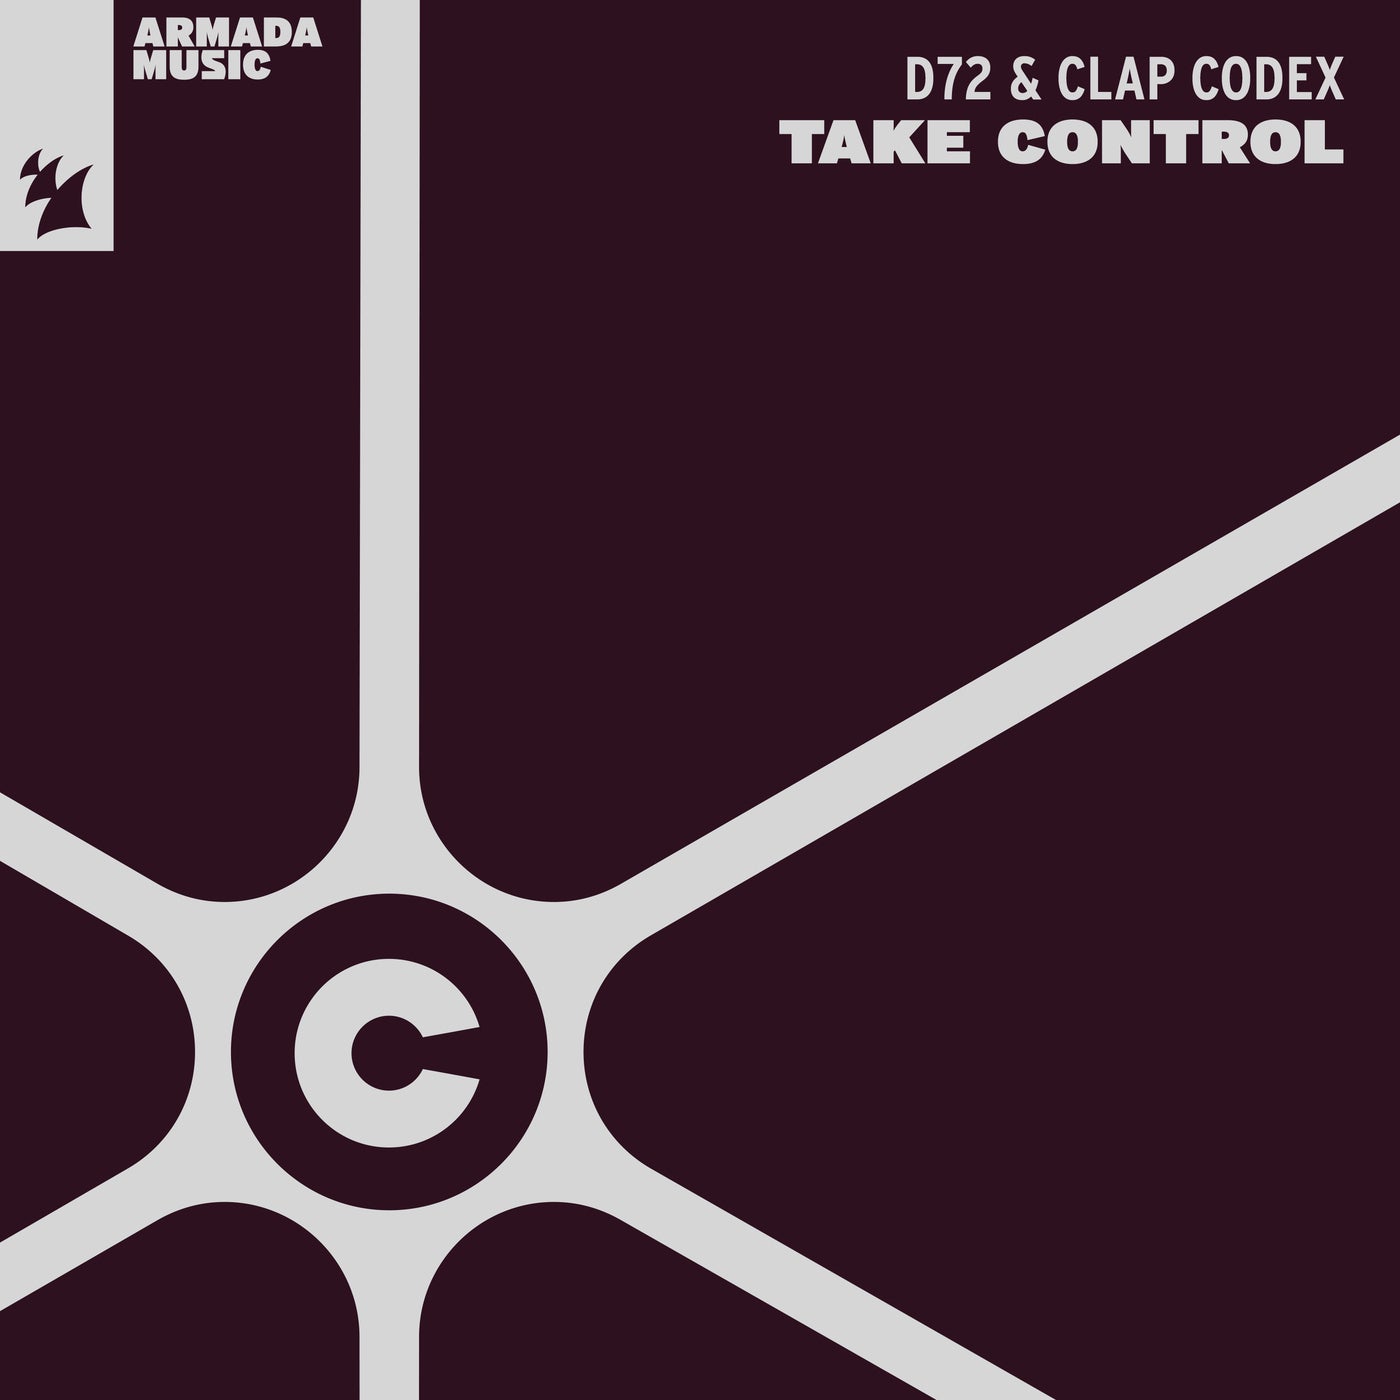 image cover: Clap Codex, D72 - Take Control on Armada Captivating